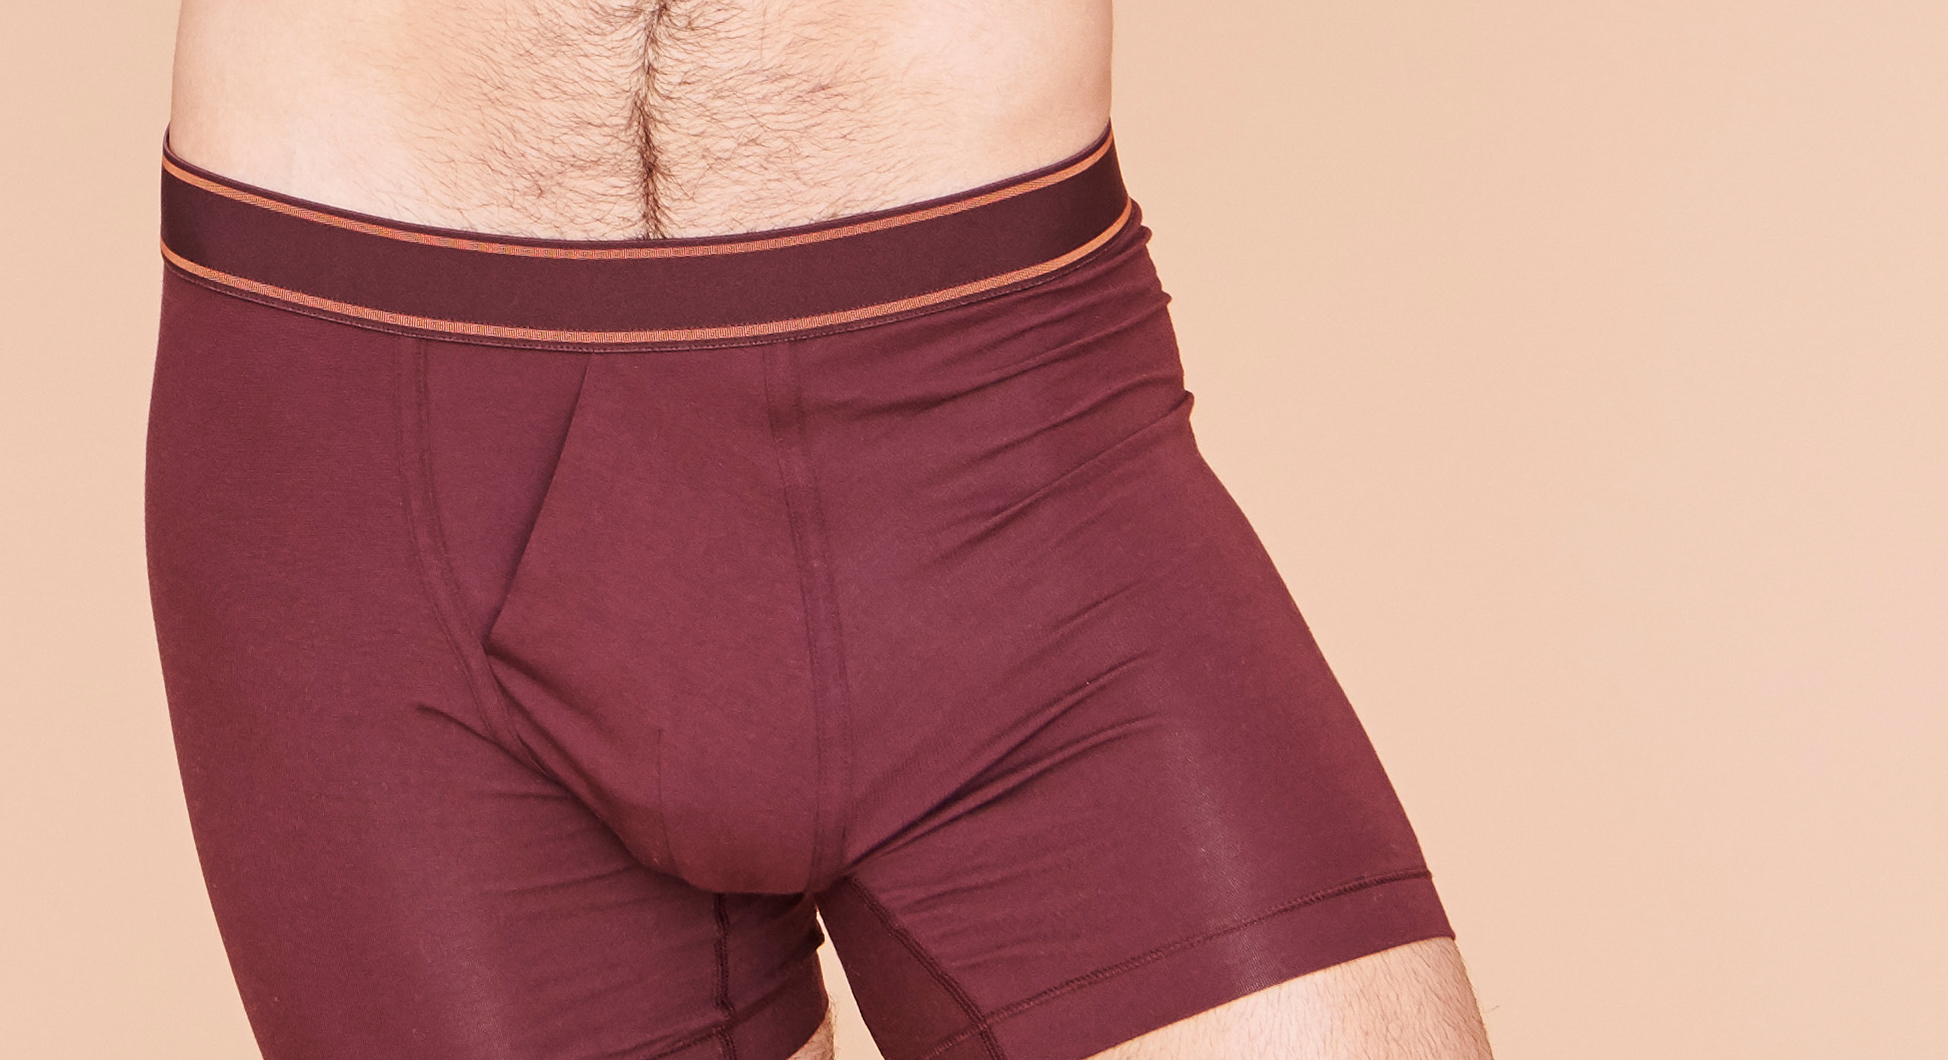 Bombas Launches Underwear With Sizes To 3XL